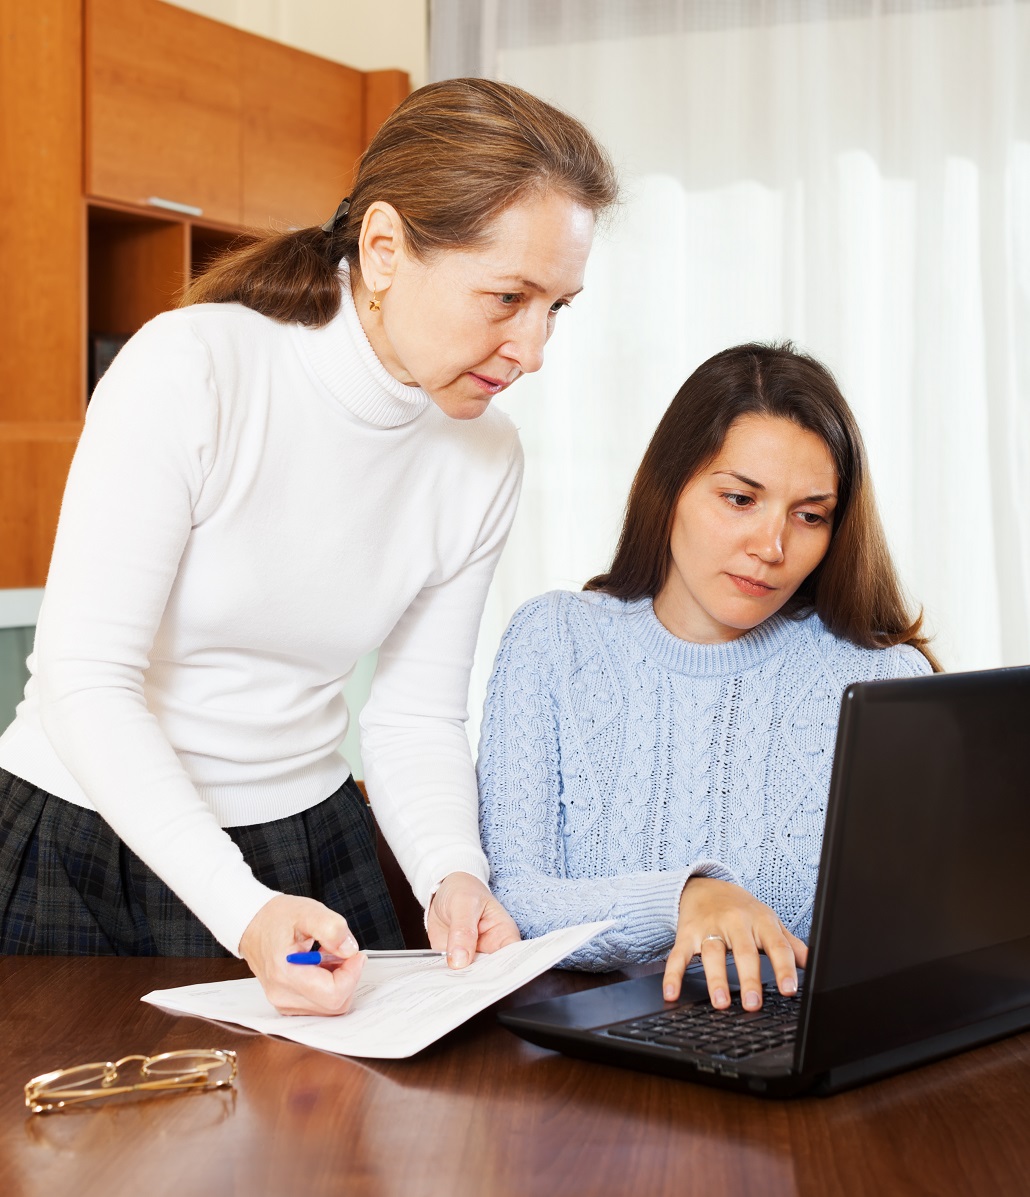 Mother and daughter using laptop together 